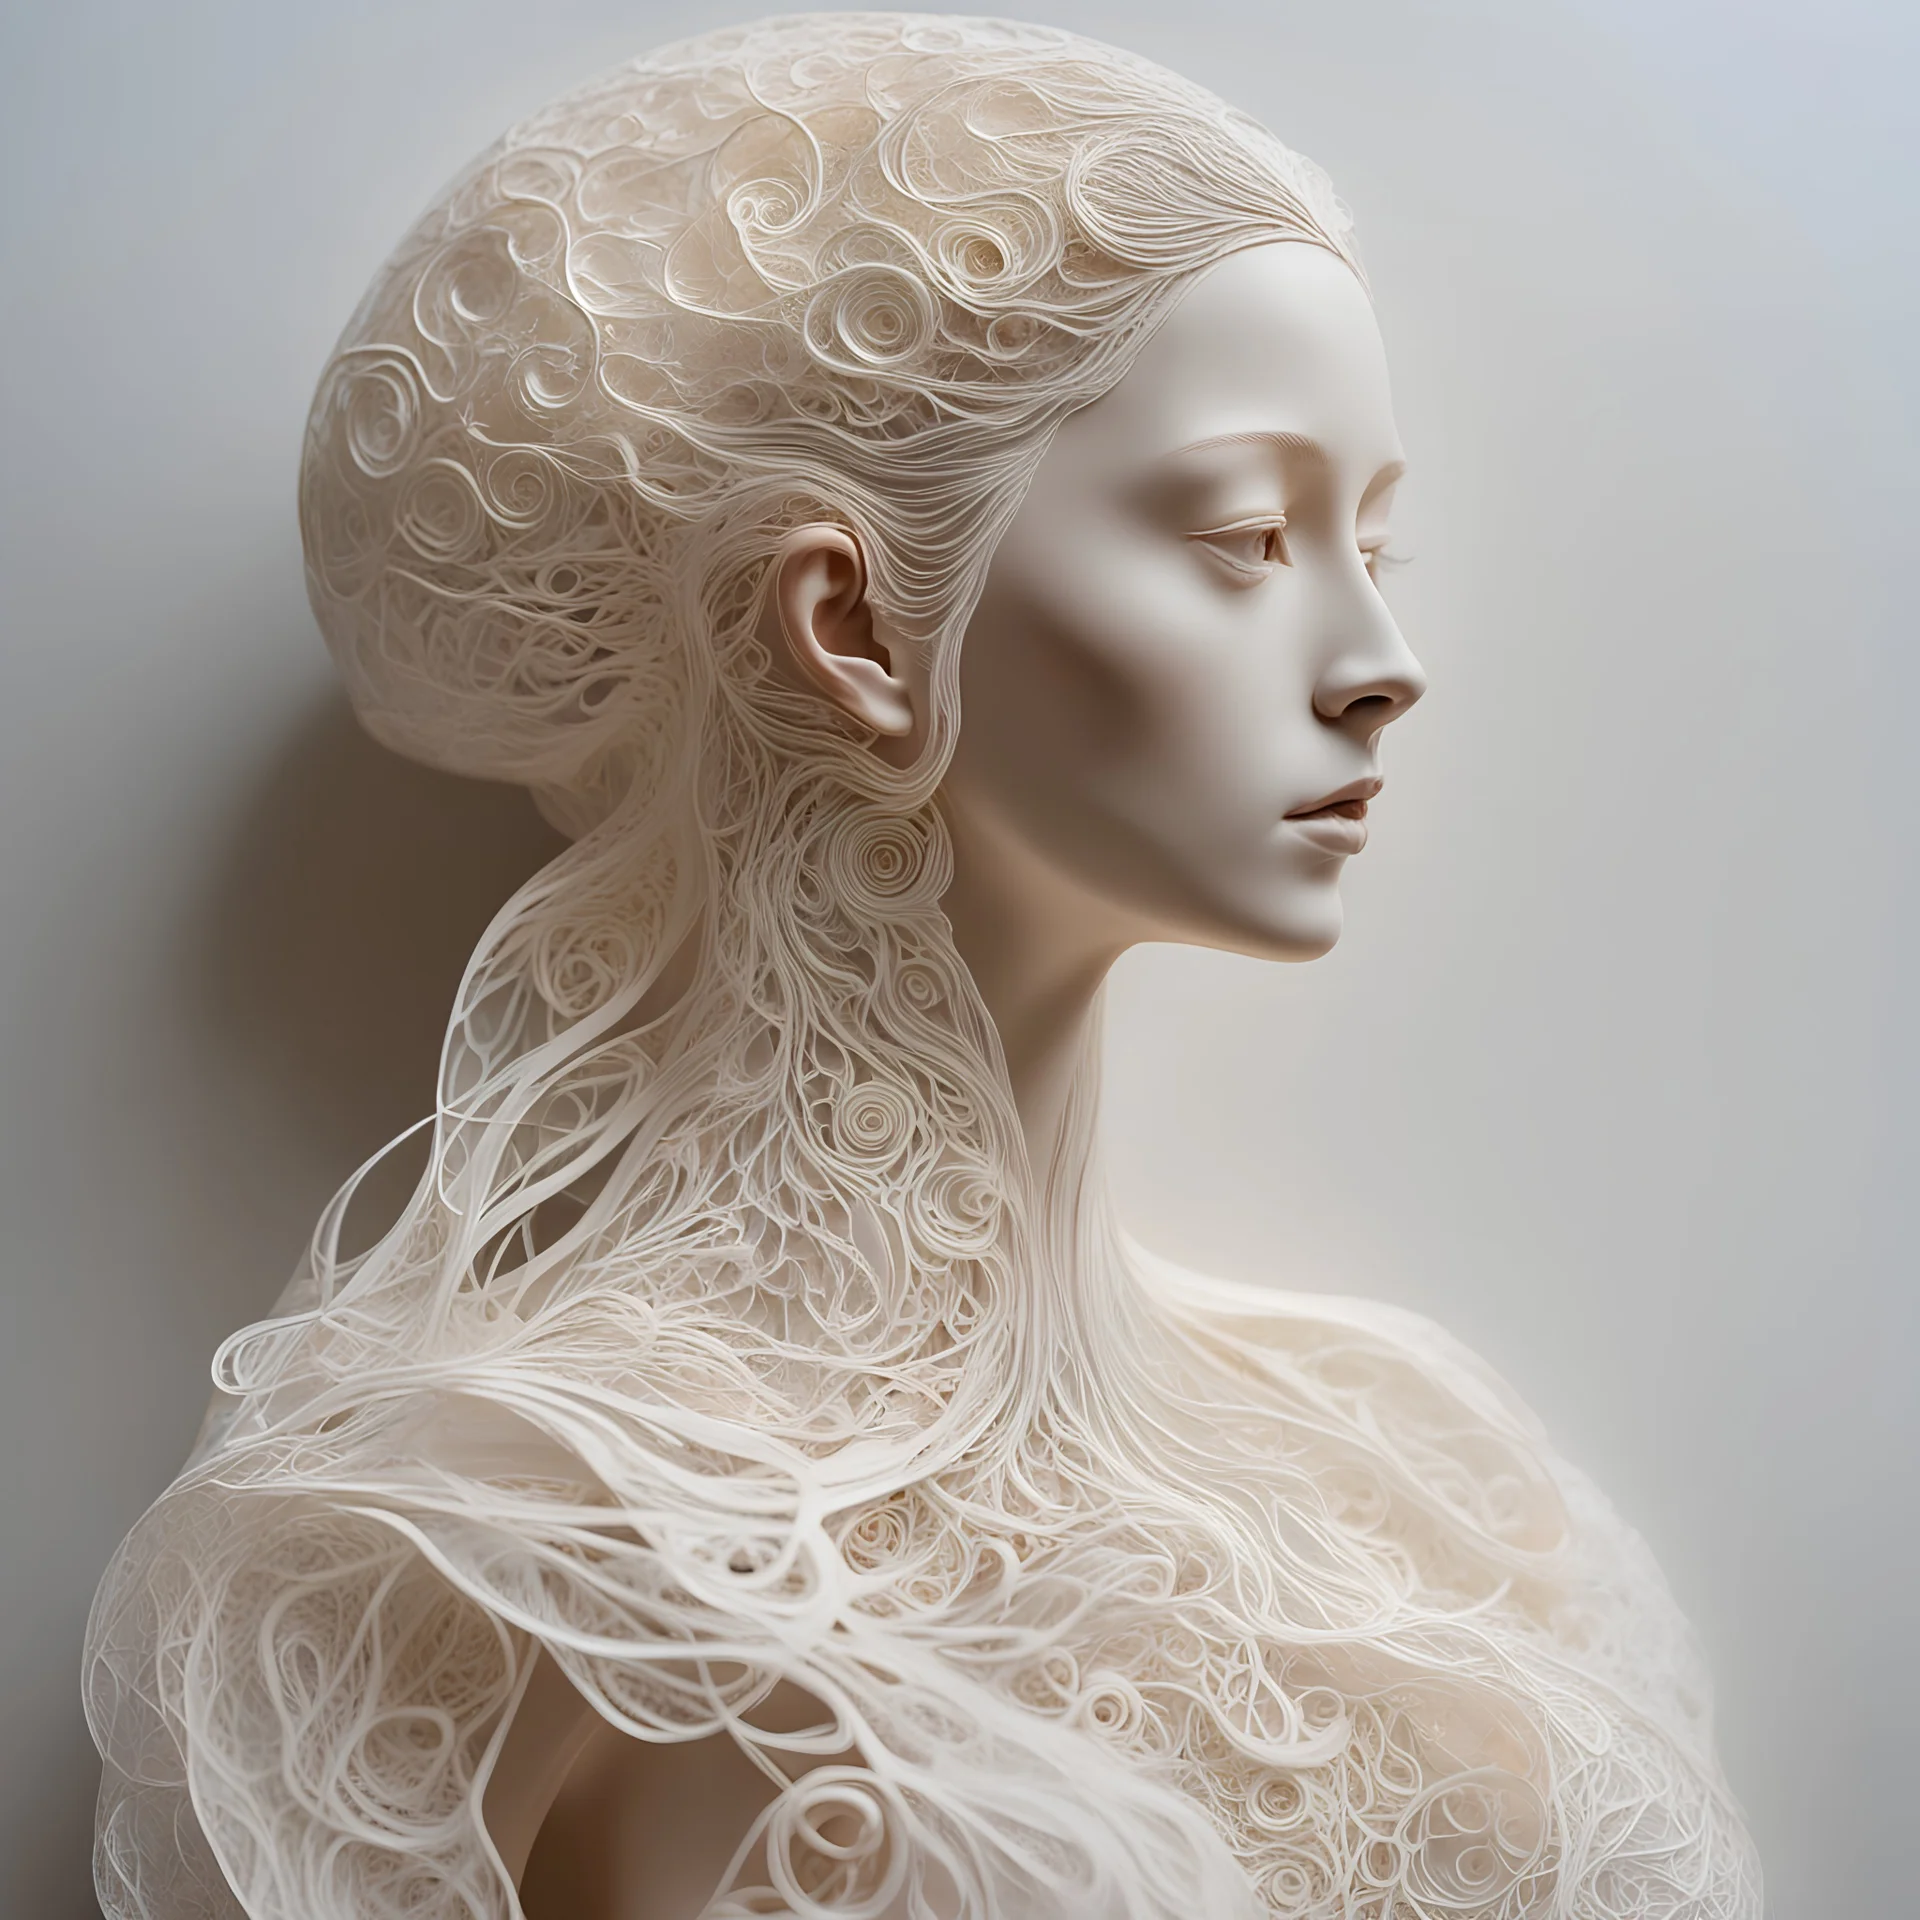 Fragile, very detailed, precise paper, thin paper art, filigree paper, slim figure, white open paper dress, futuristic version, transparent, invisible, hollow, beautiful paper anatomy, paper freckles, braided paper updo paper hair, Leonardo da Vinci, facing right, created from fine paper, curled white paper, shot with Sony Alpha a9 Il and Sony FE 200-600mm f/5.6-6.3 G OSS lens, natural ligh, hyper realistic photograph, ultra detailed -ar 1:1 —q 2 -s 750)